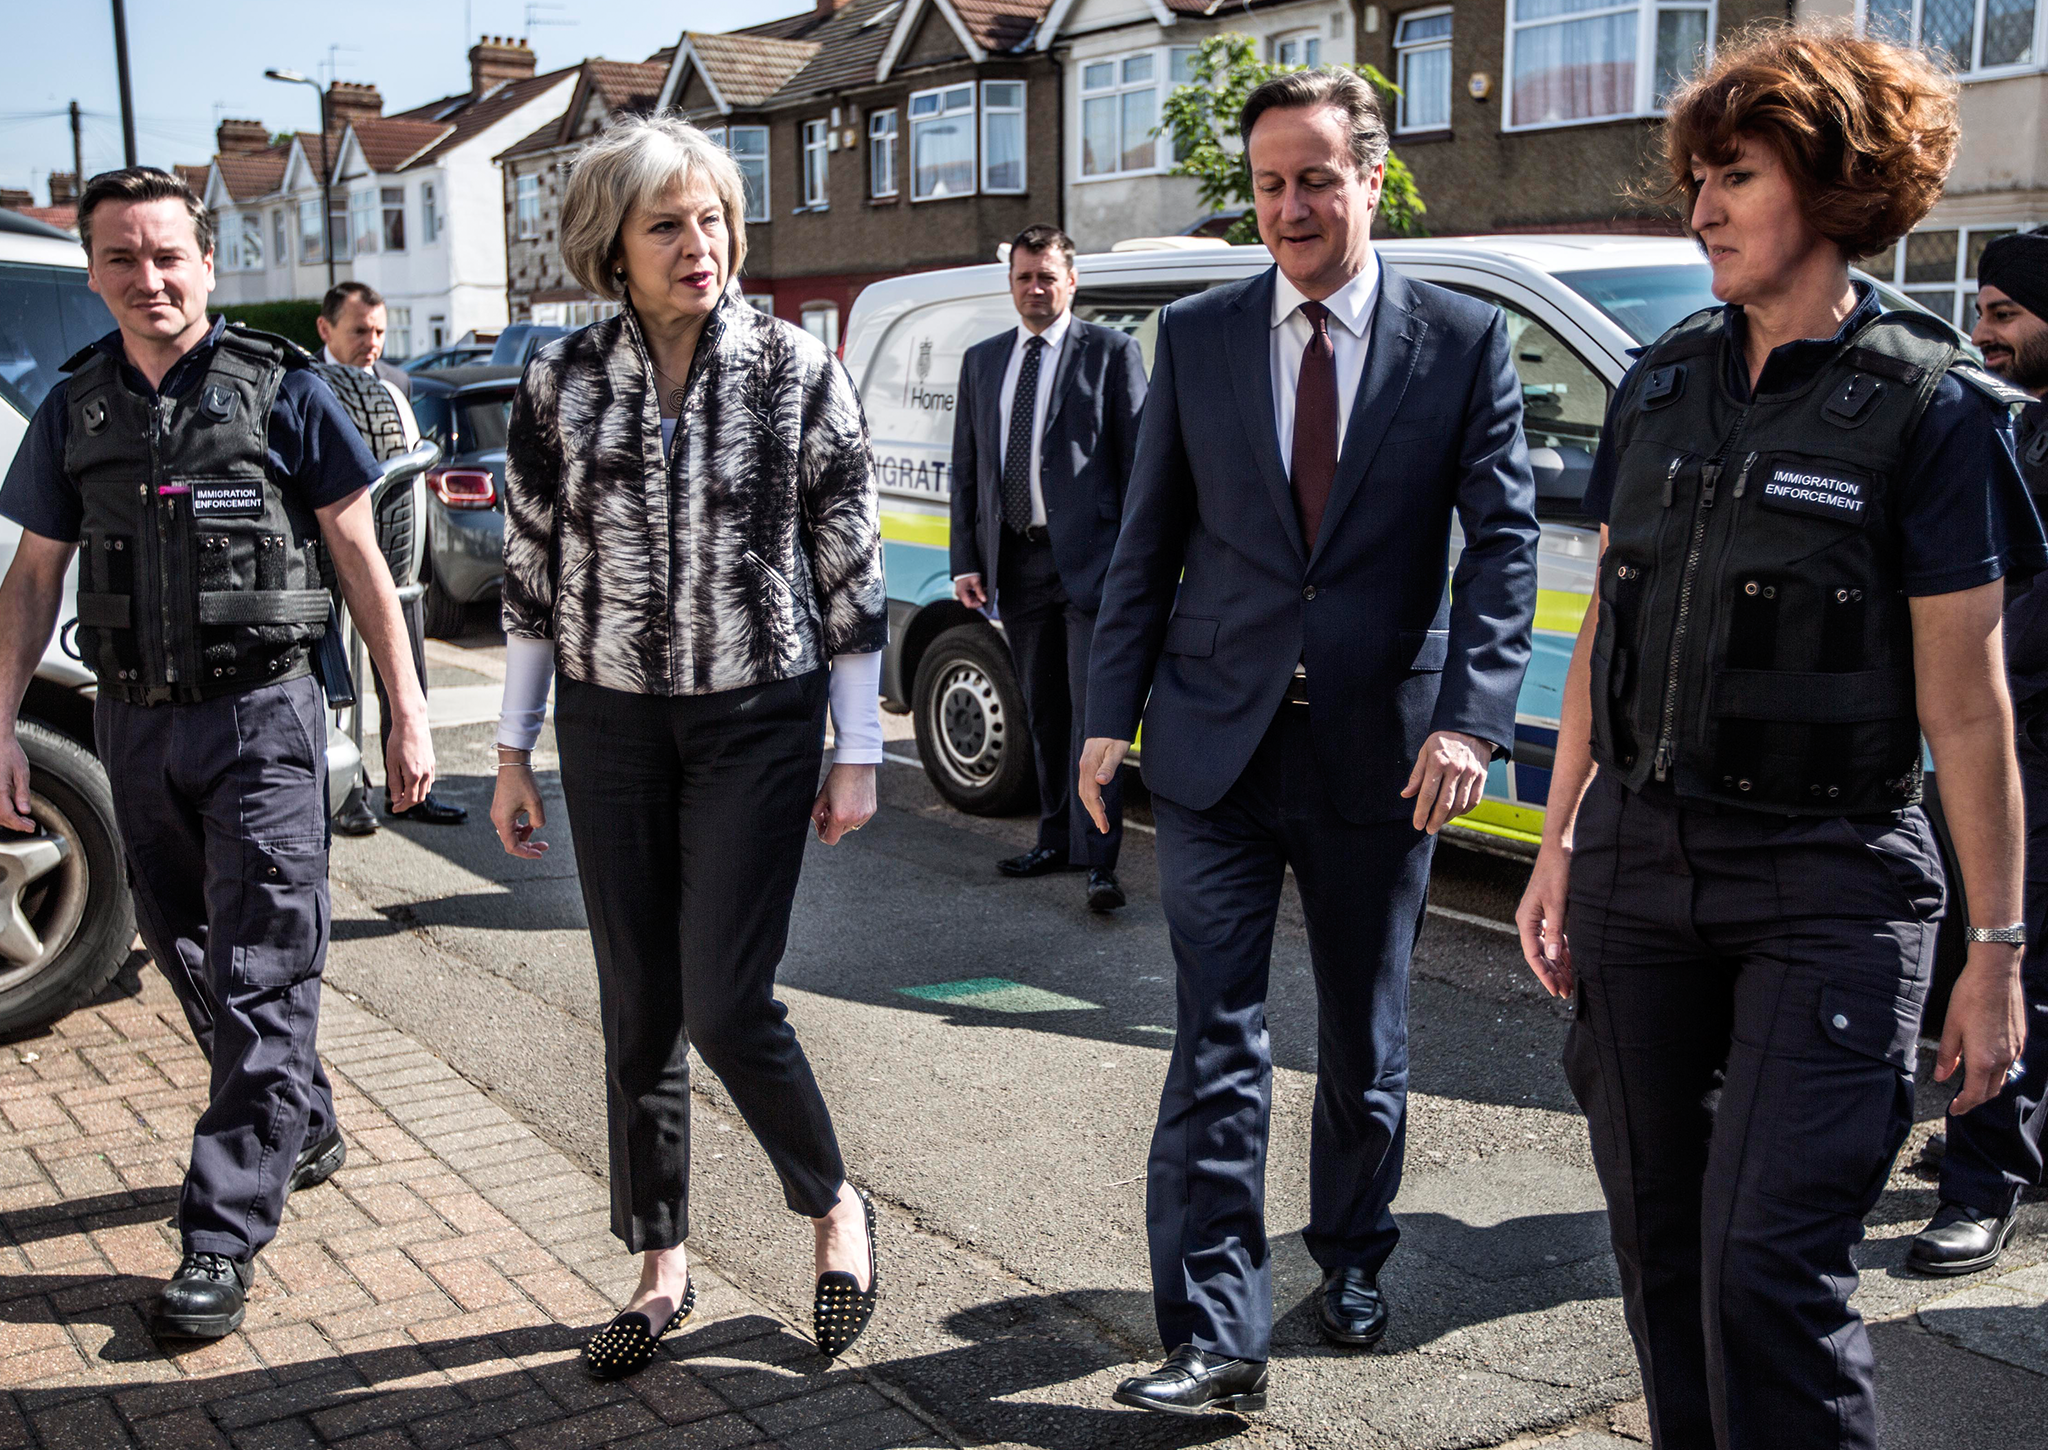 Theresa May and David Cameron talk to Immigration Enforcement officers after the officers raided residential properties looking for illegal immigrants